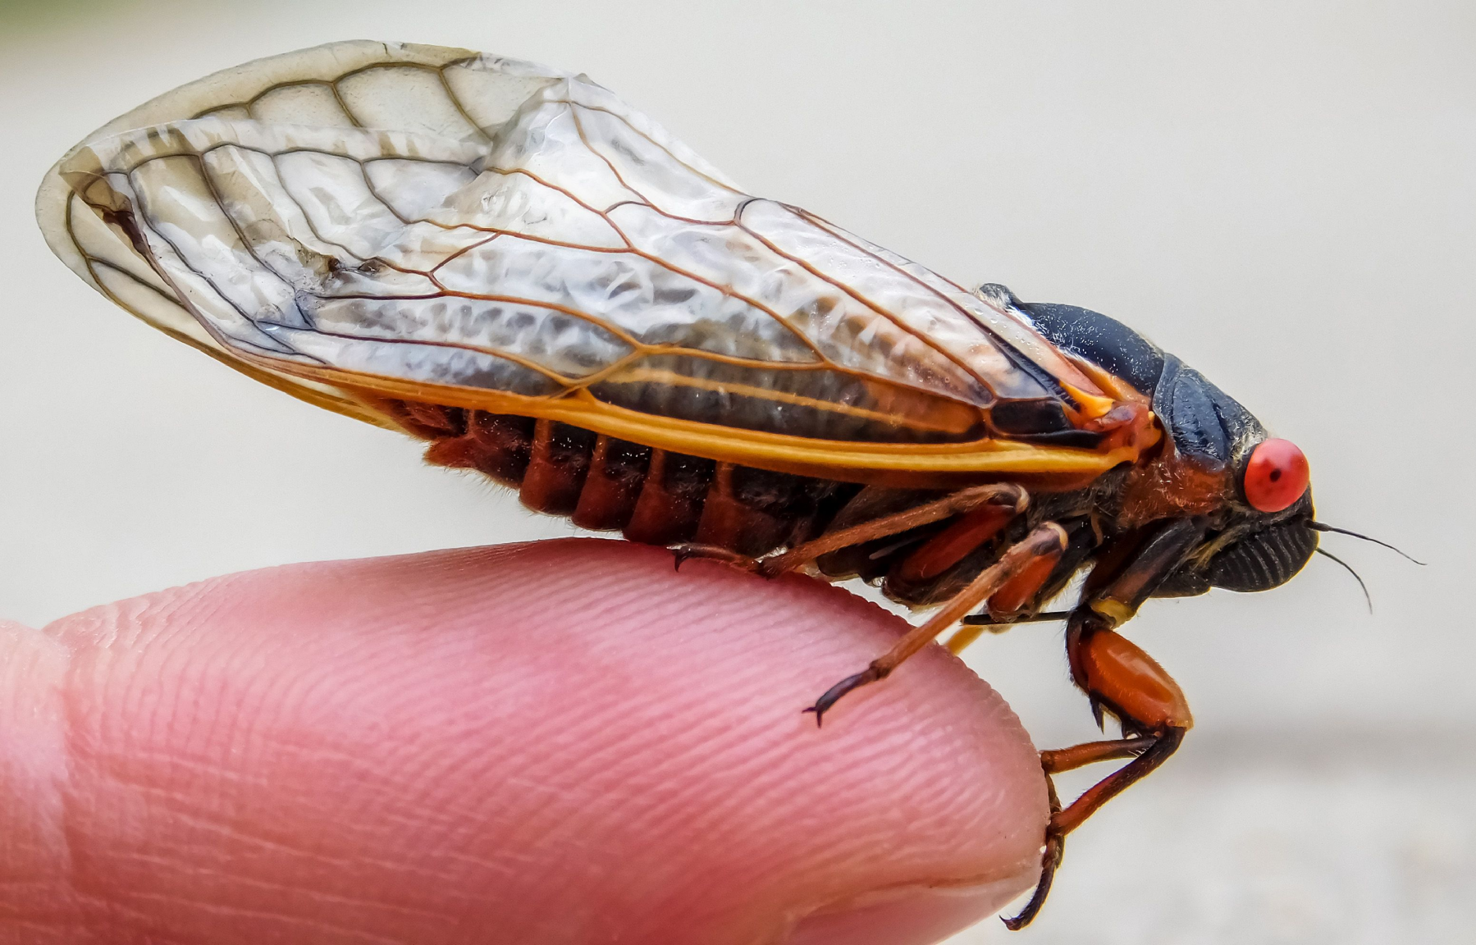 Virginia Is Expected to See Brood XIX Cicadas This Year